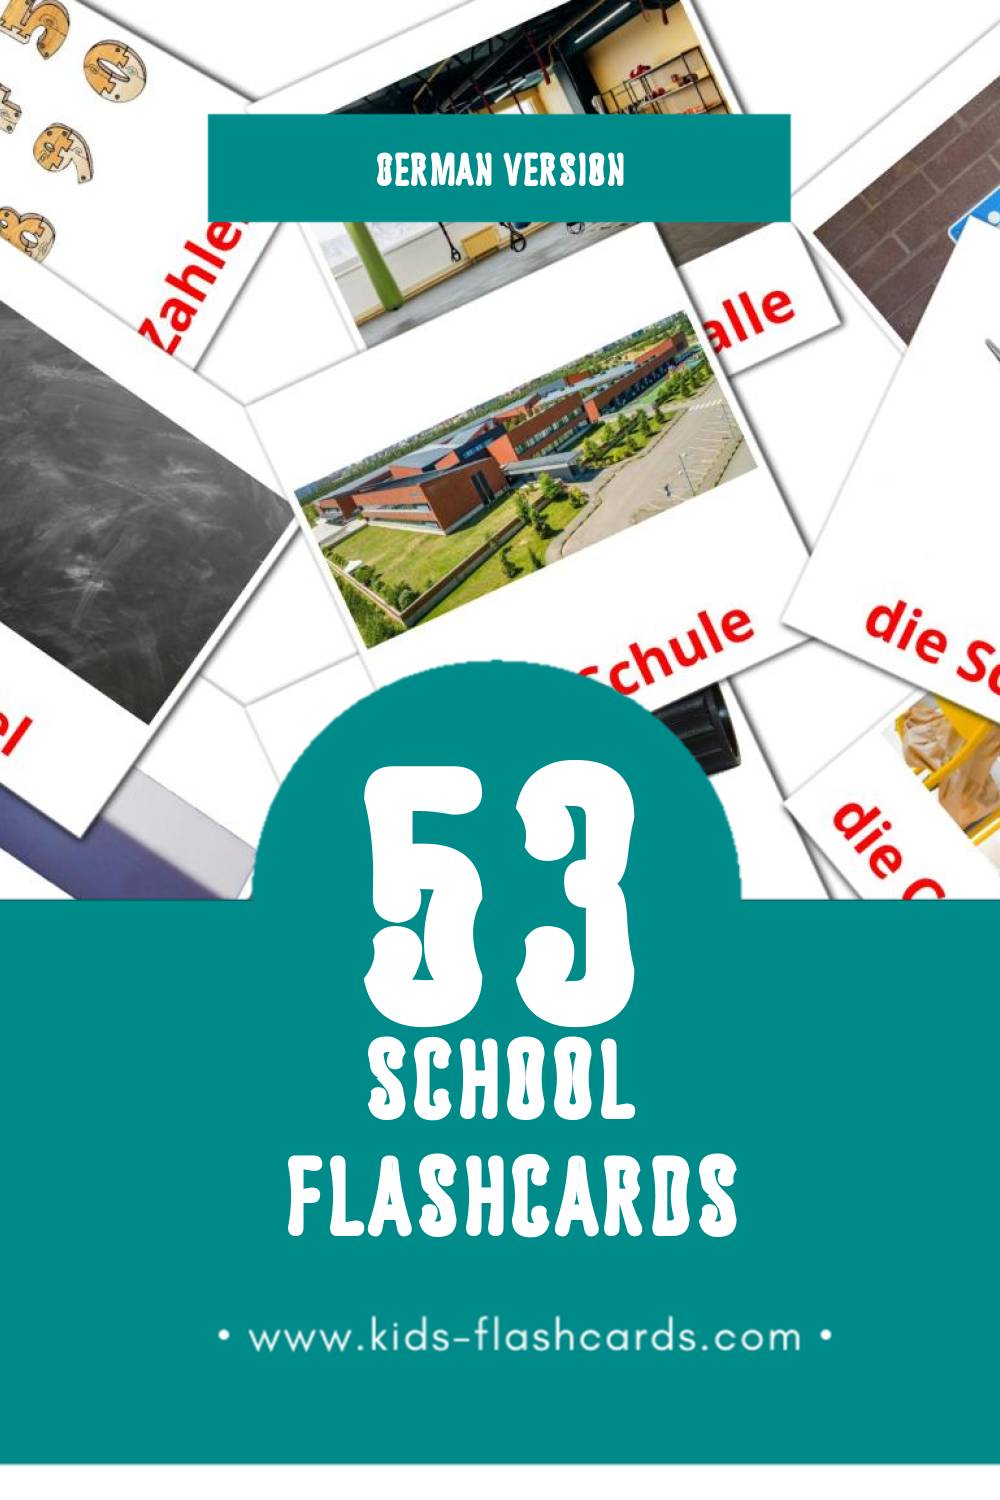 Visual Schule Flashcards for Toddlers (53 cards in German)